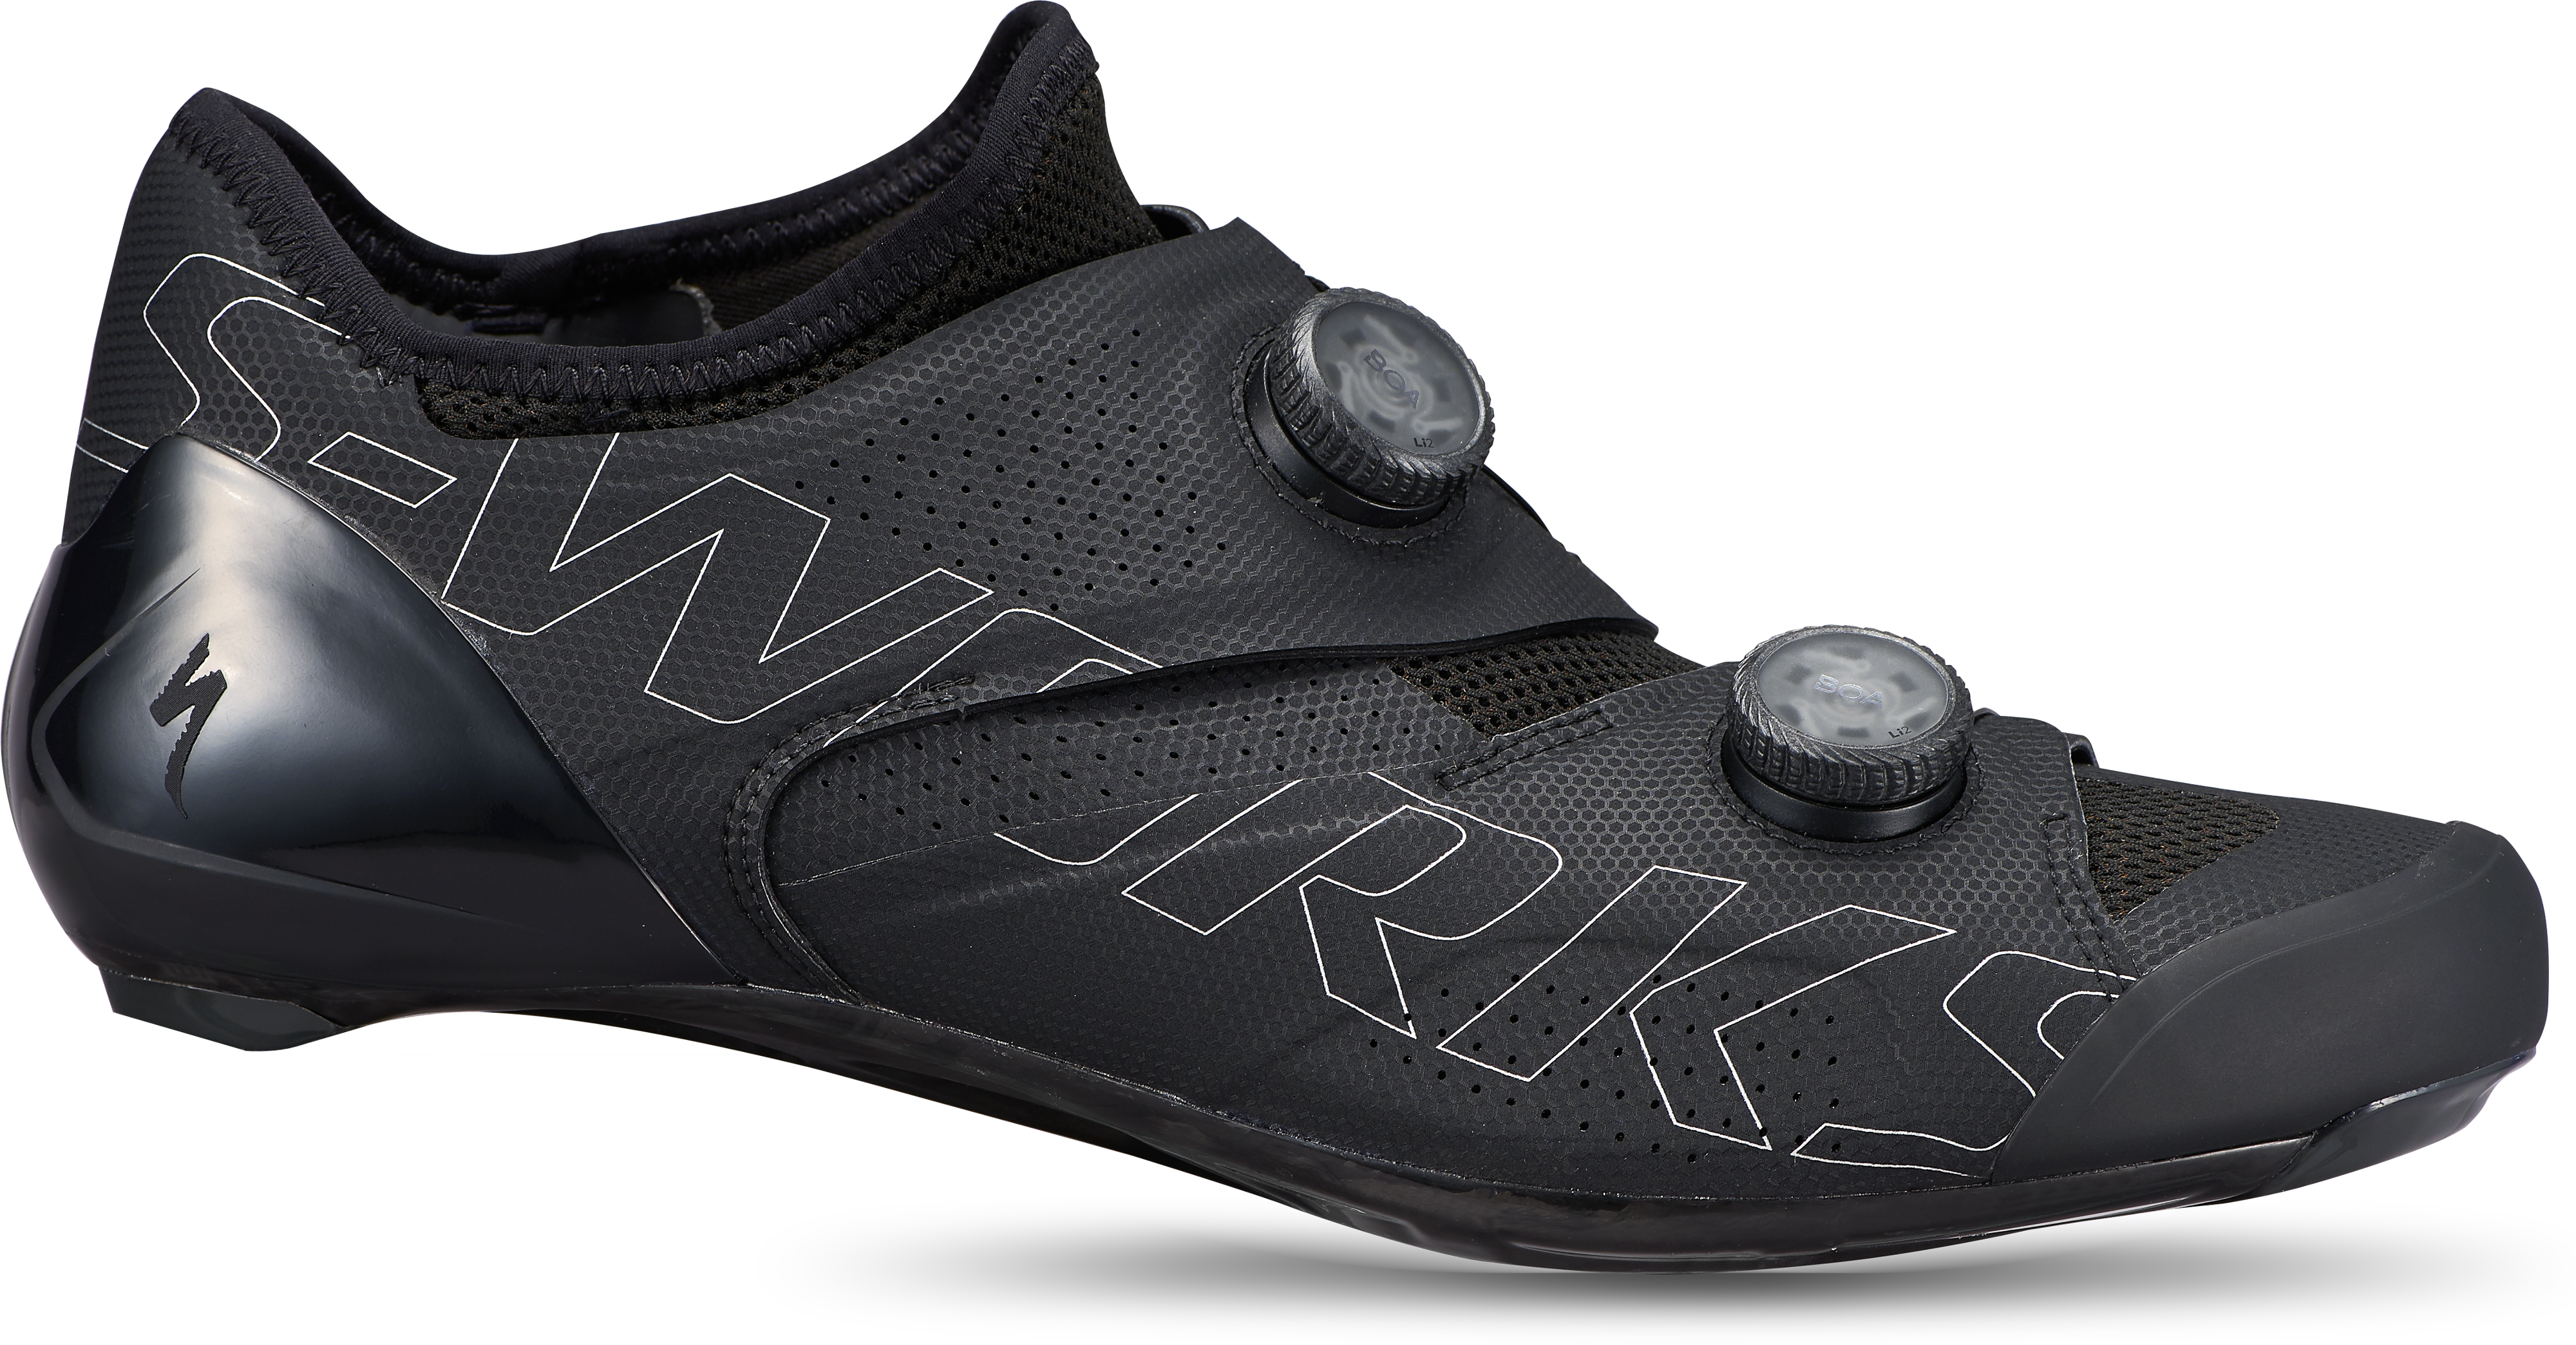 S-WORKS ARES ROAD SHOES